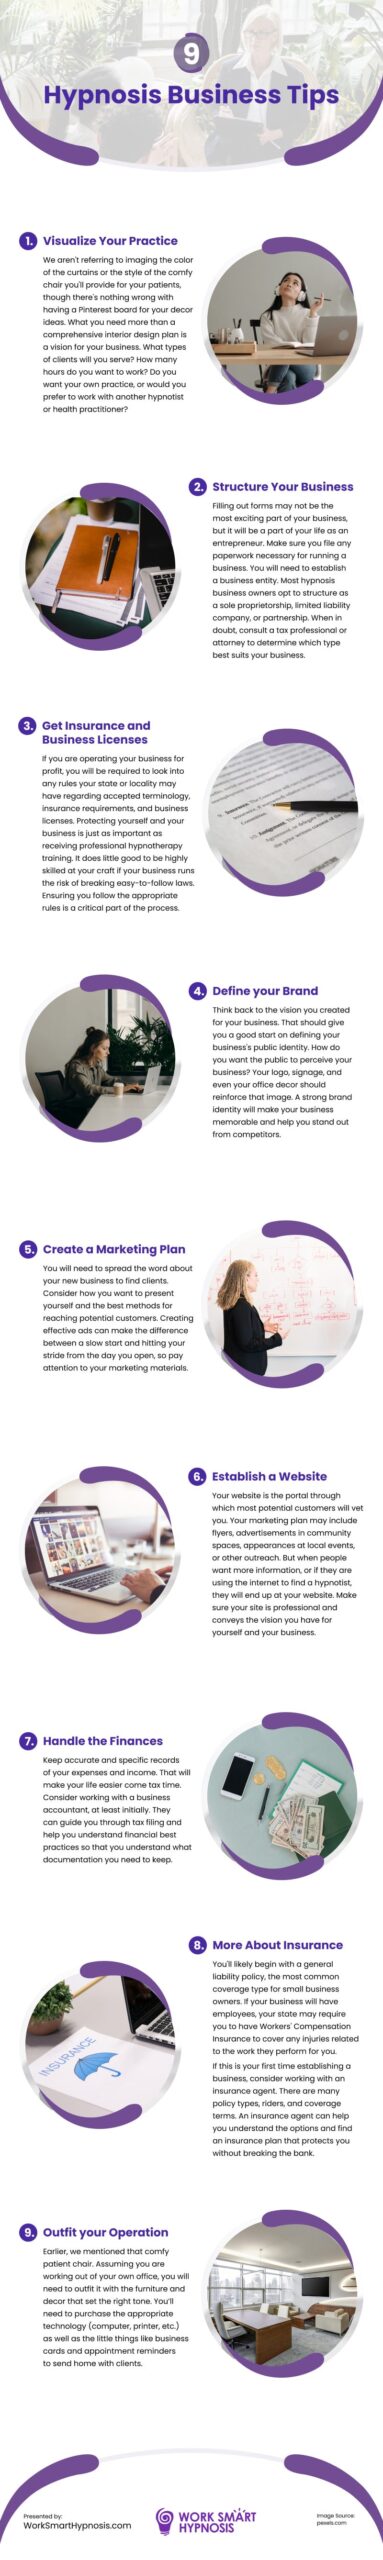 9 Hypnosis Business Tips Infographic